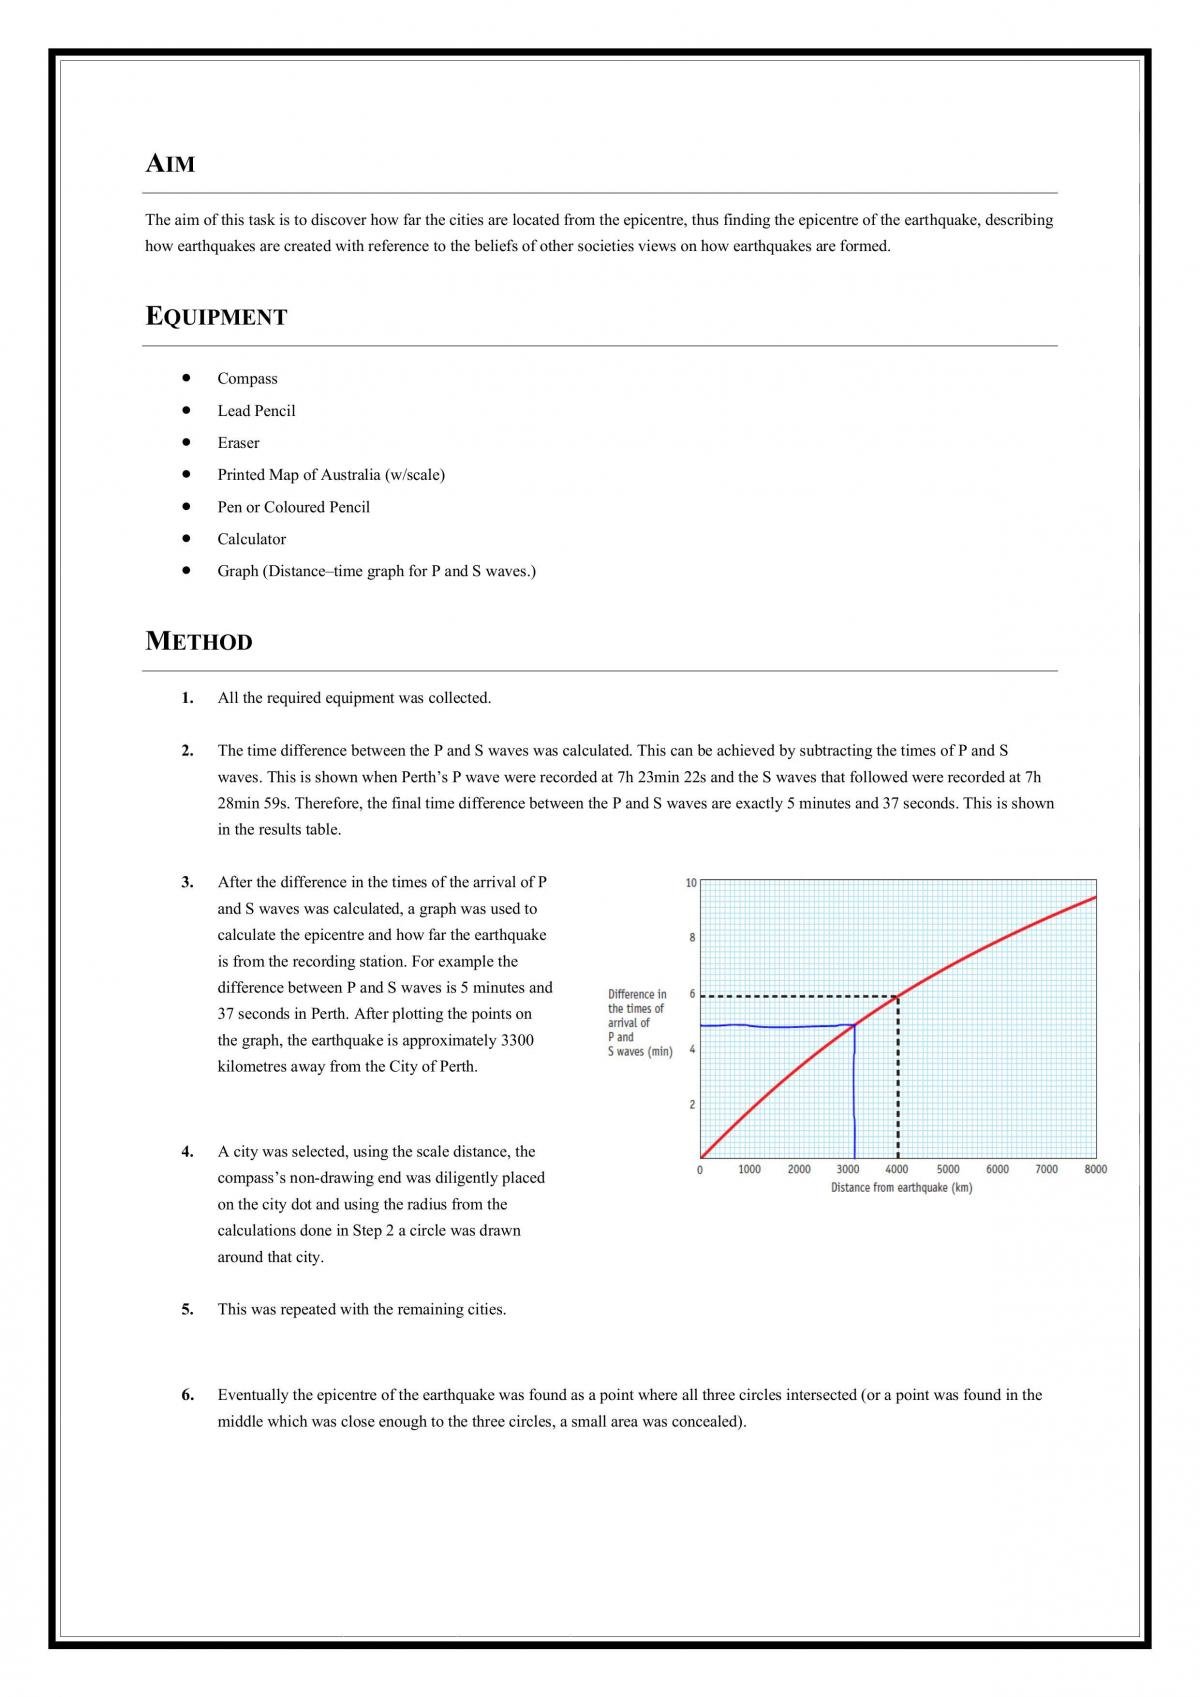 Earthquakes Practical Report - Page 2